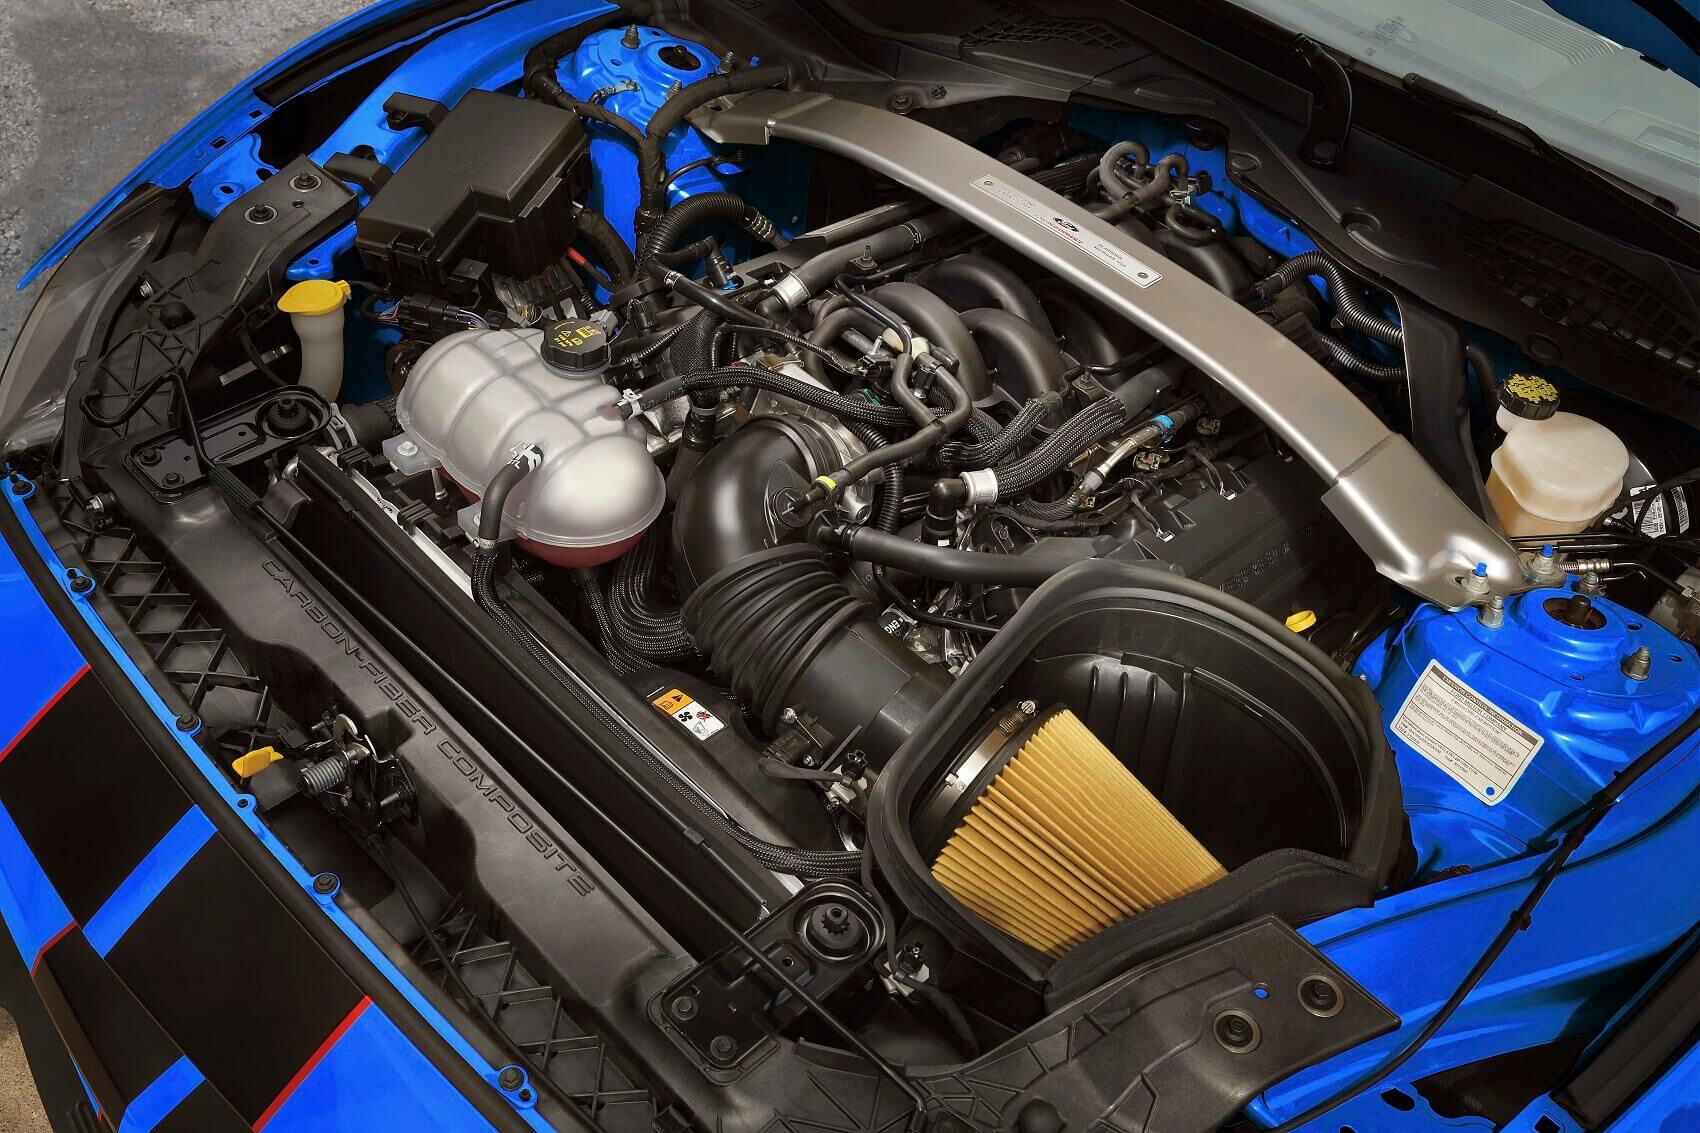 2020 Ford Mustang Engine Specs